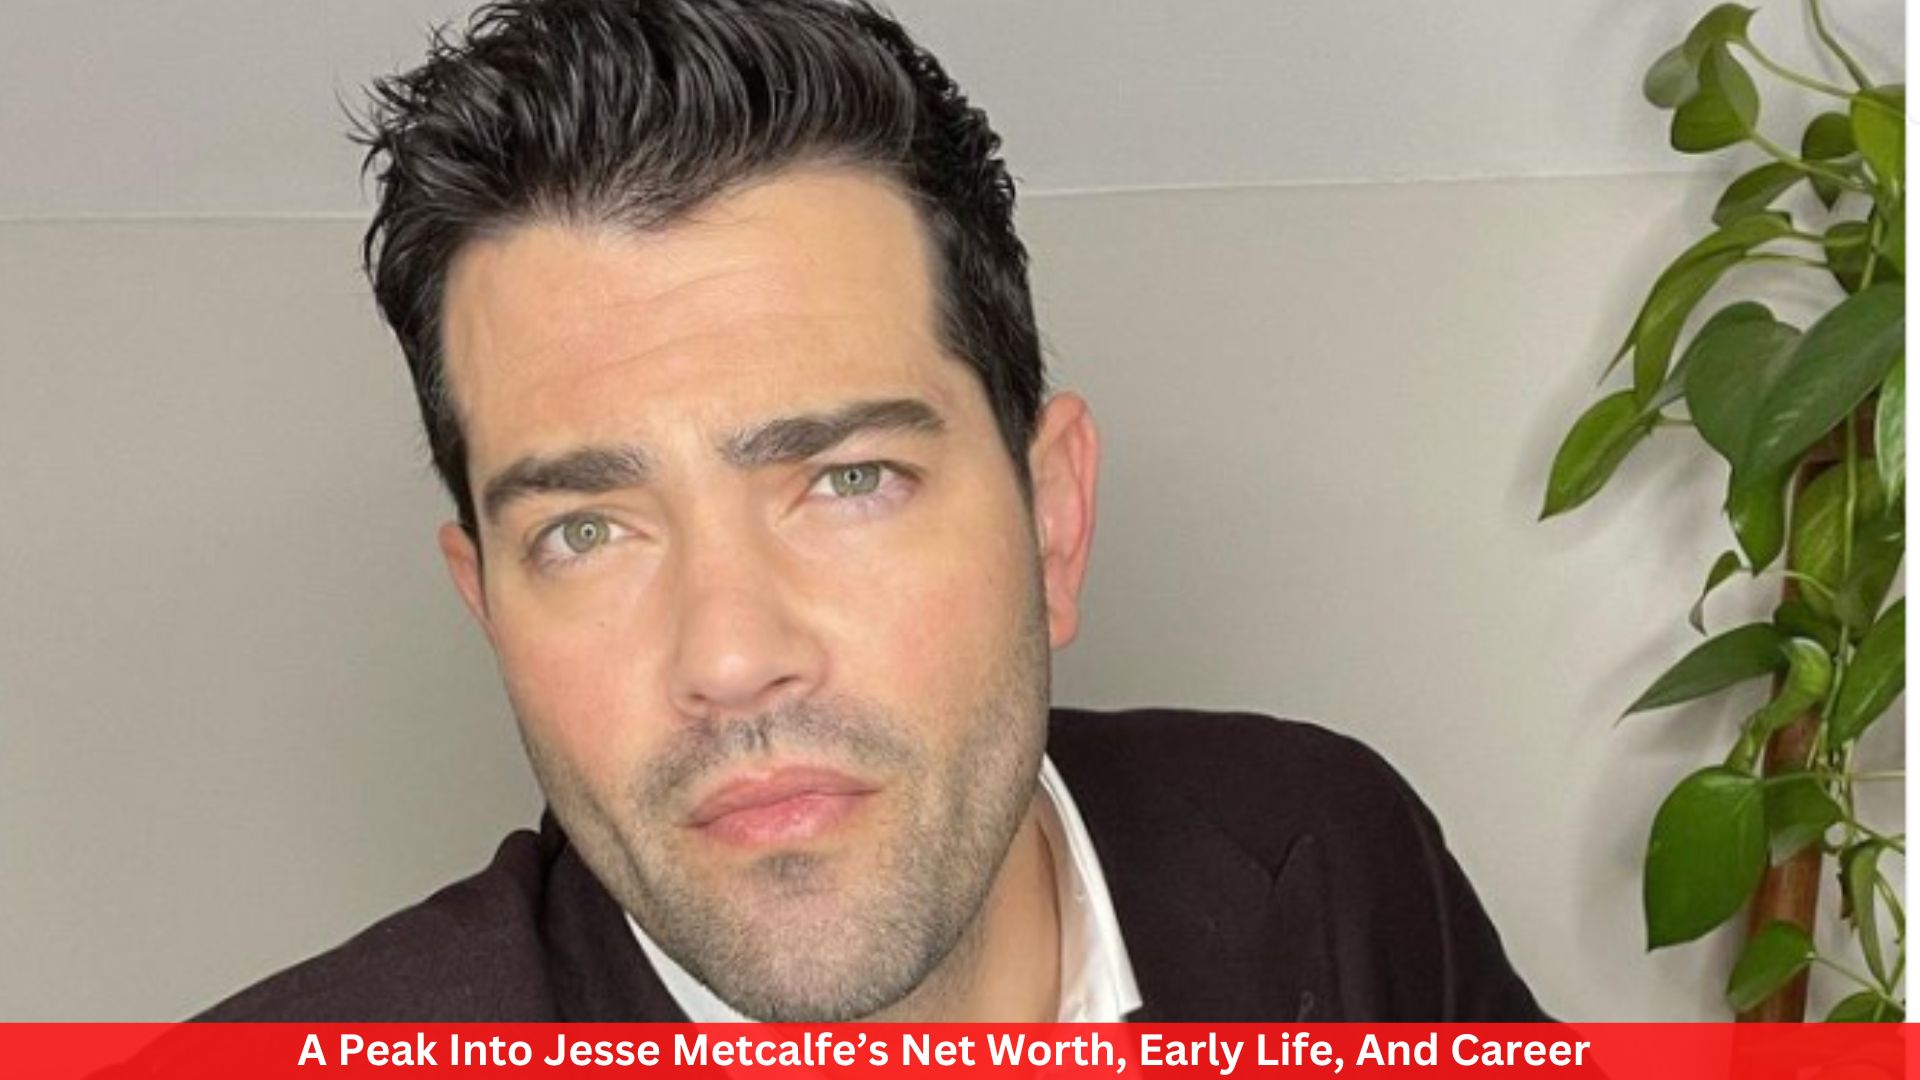 A Peak Into Jesse Metcalfe’s Net Worth, Early Life, And Career